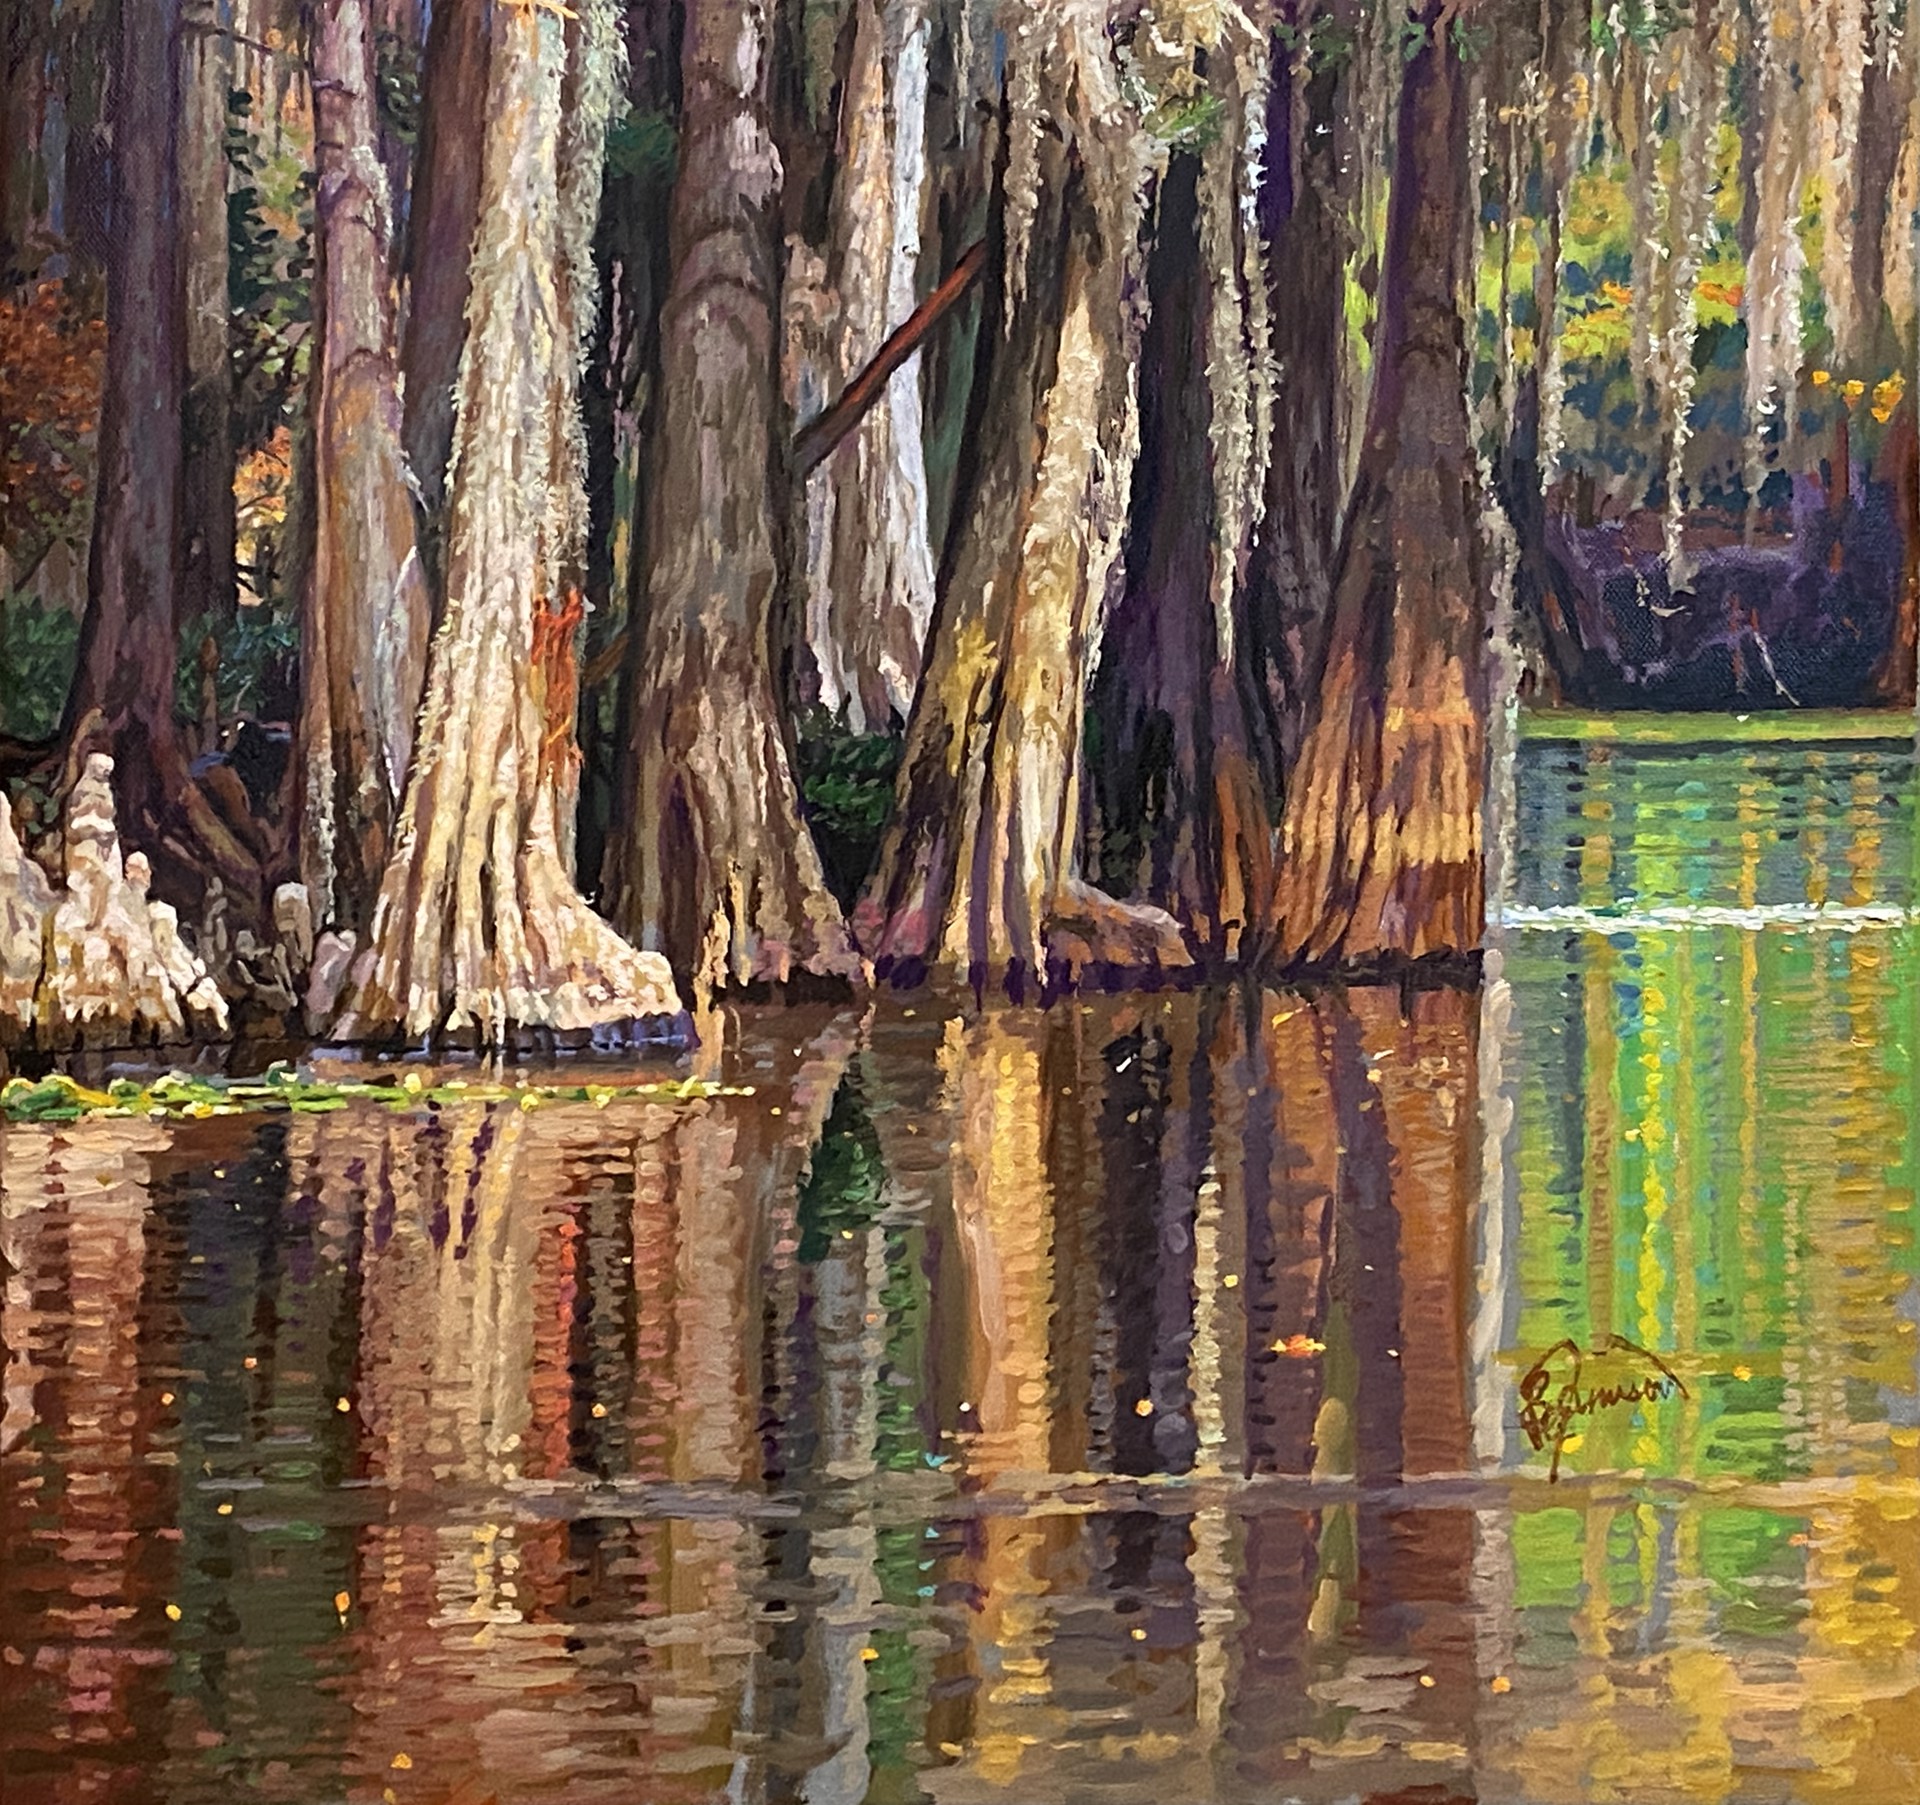 The Meadow of a Cypress Forrest by Lee Jamison